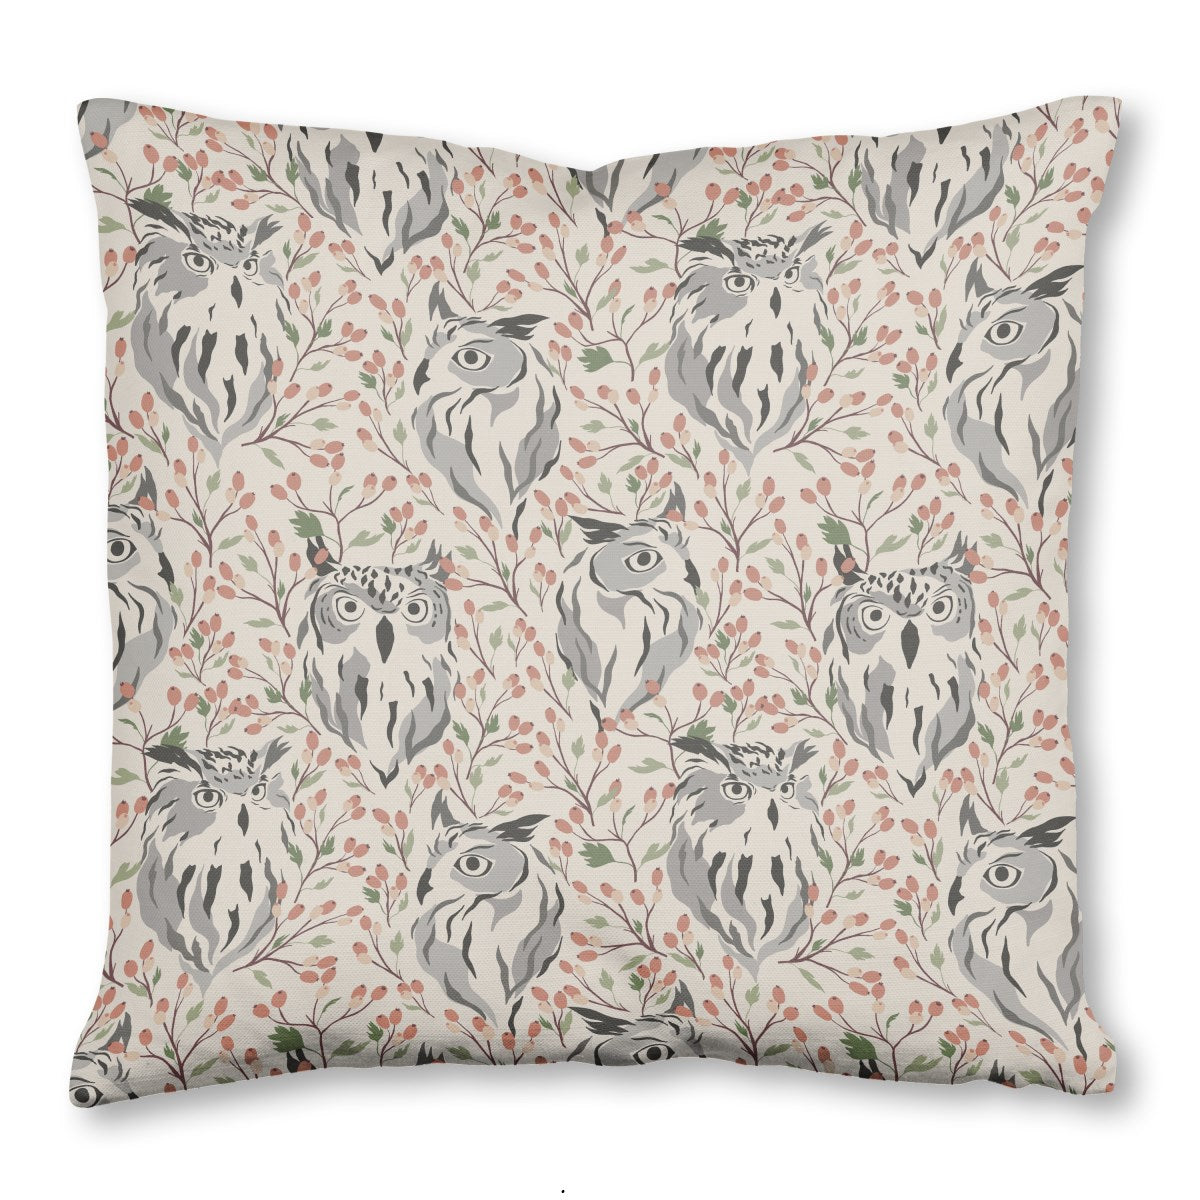 Perched Owl Throw Pillow